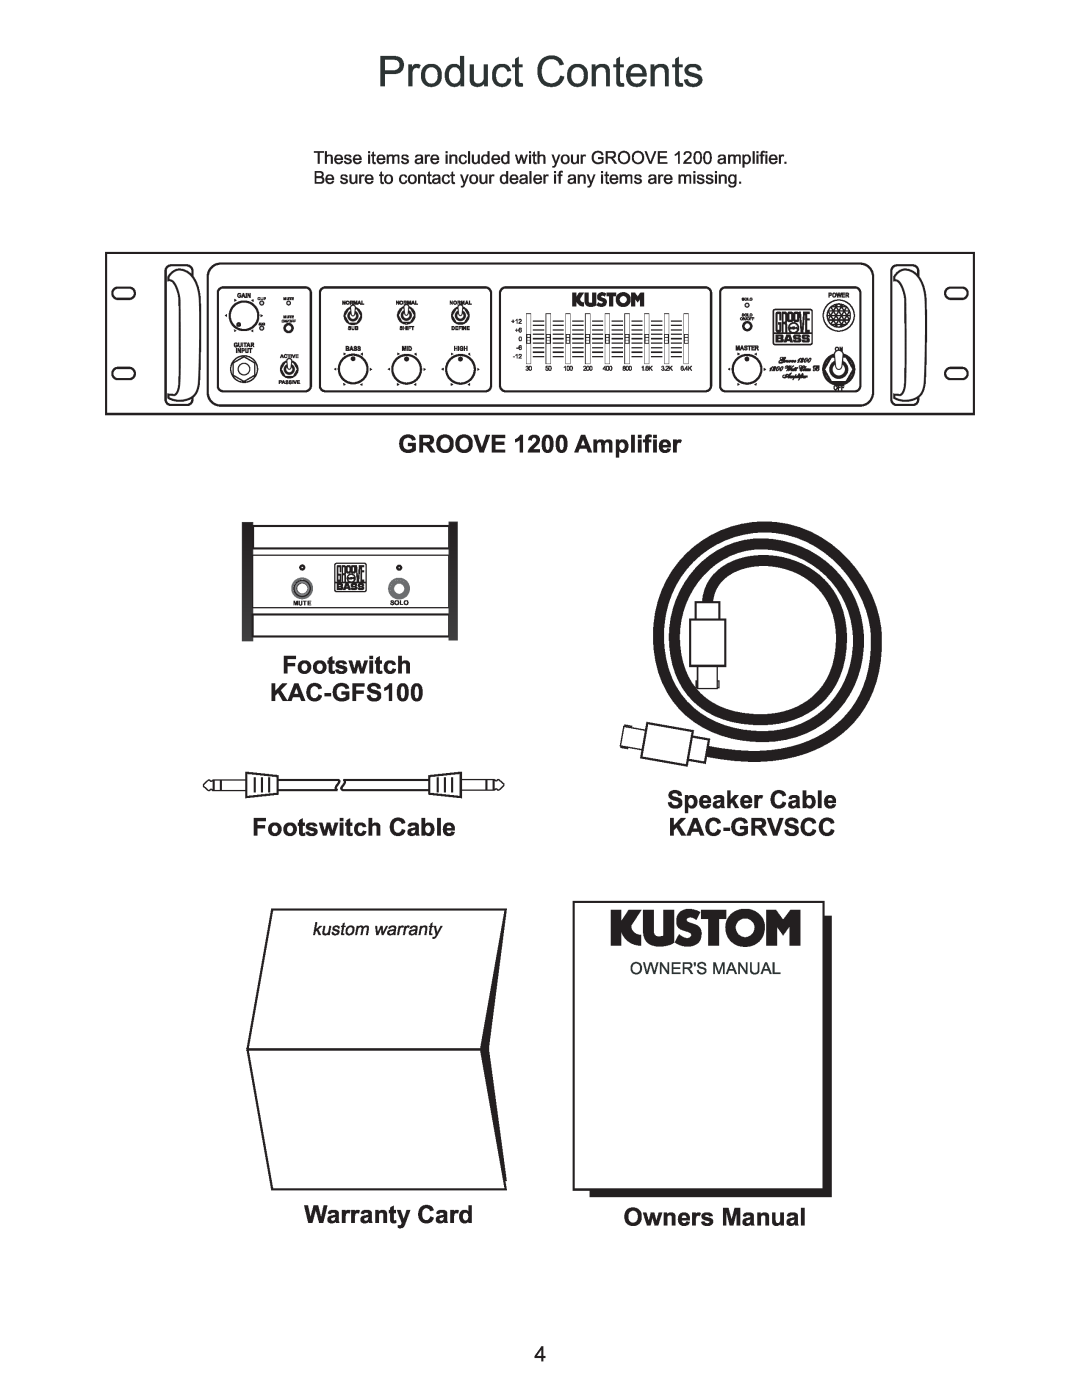 Kustom Product Contents, GROOVE 1200 Amplifier, Footswitch KAC-GFS100, Footswitch Cable, Warranty Card, Speaker Cable 